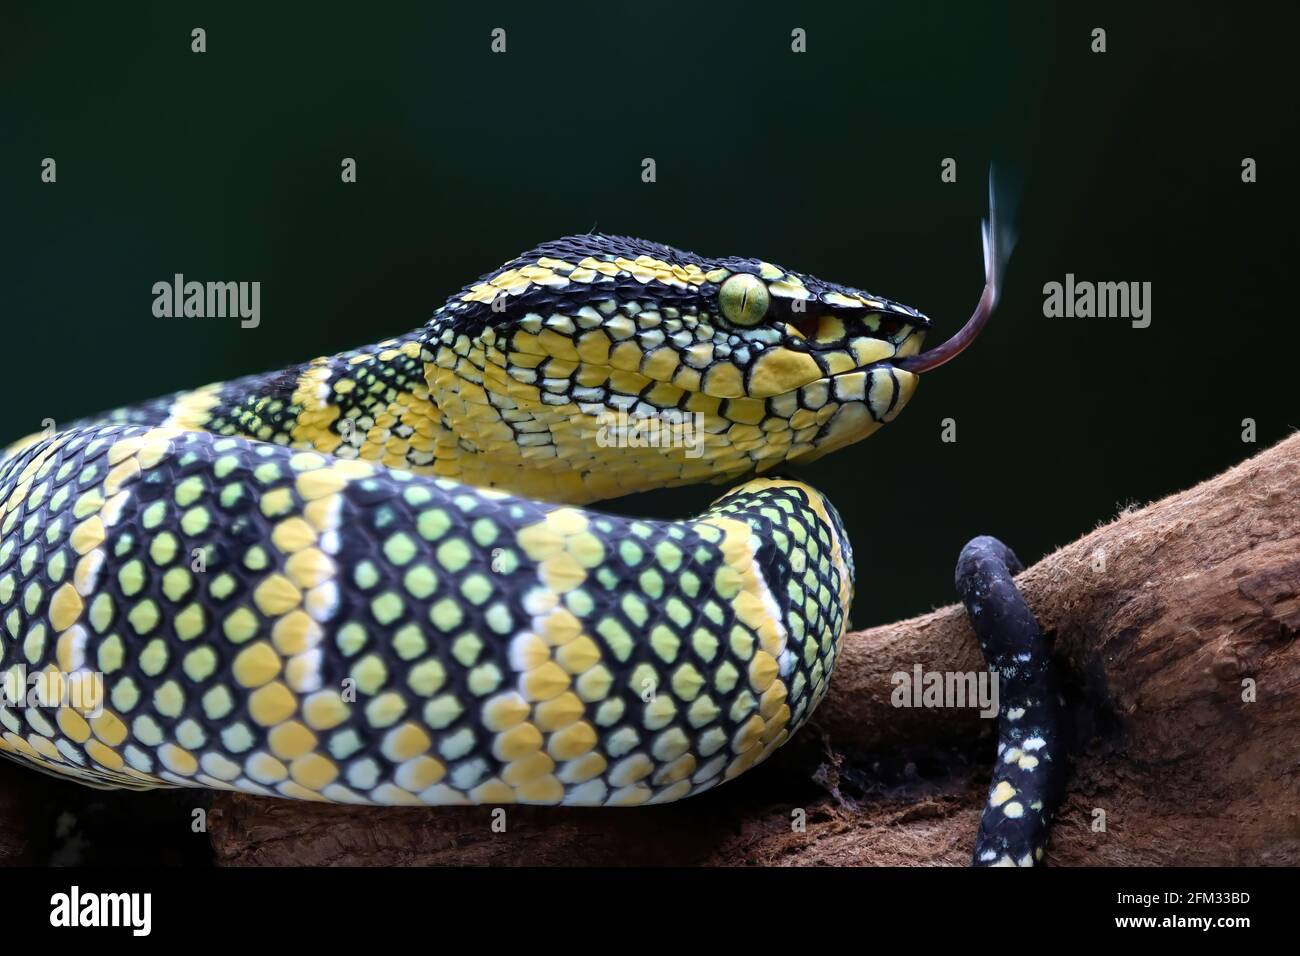 Wagler's pit viper on a tree branch, Indonesia Stock Photo